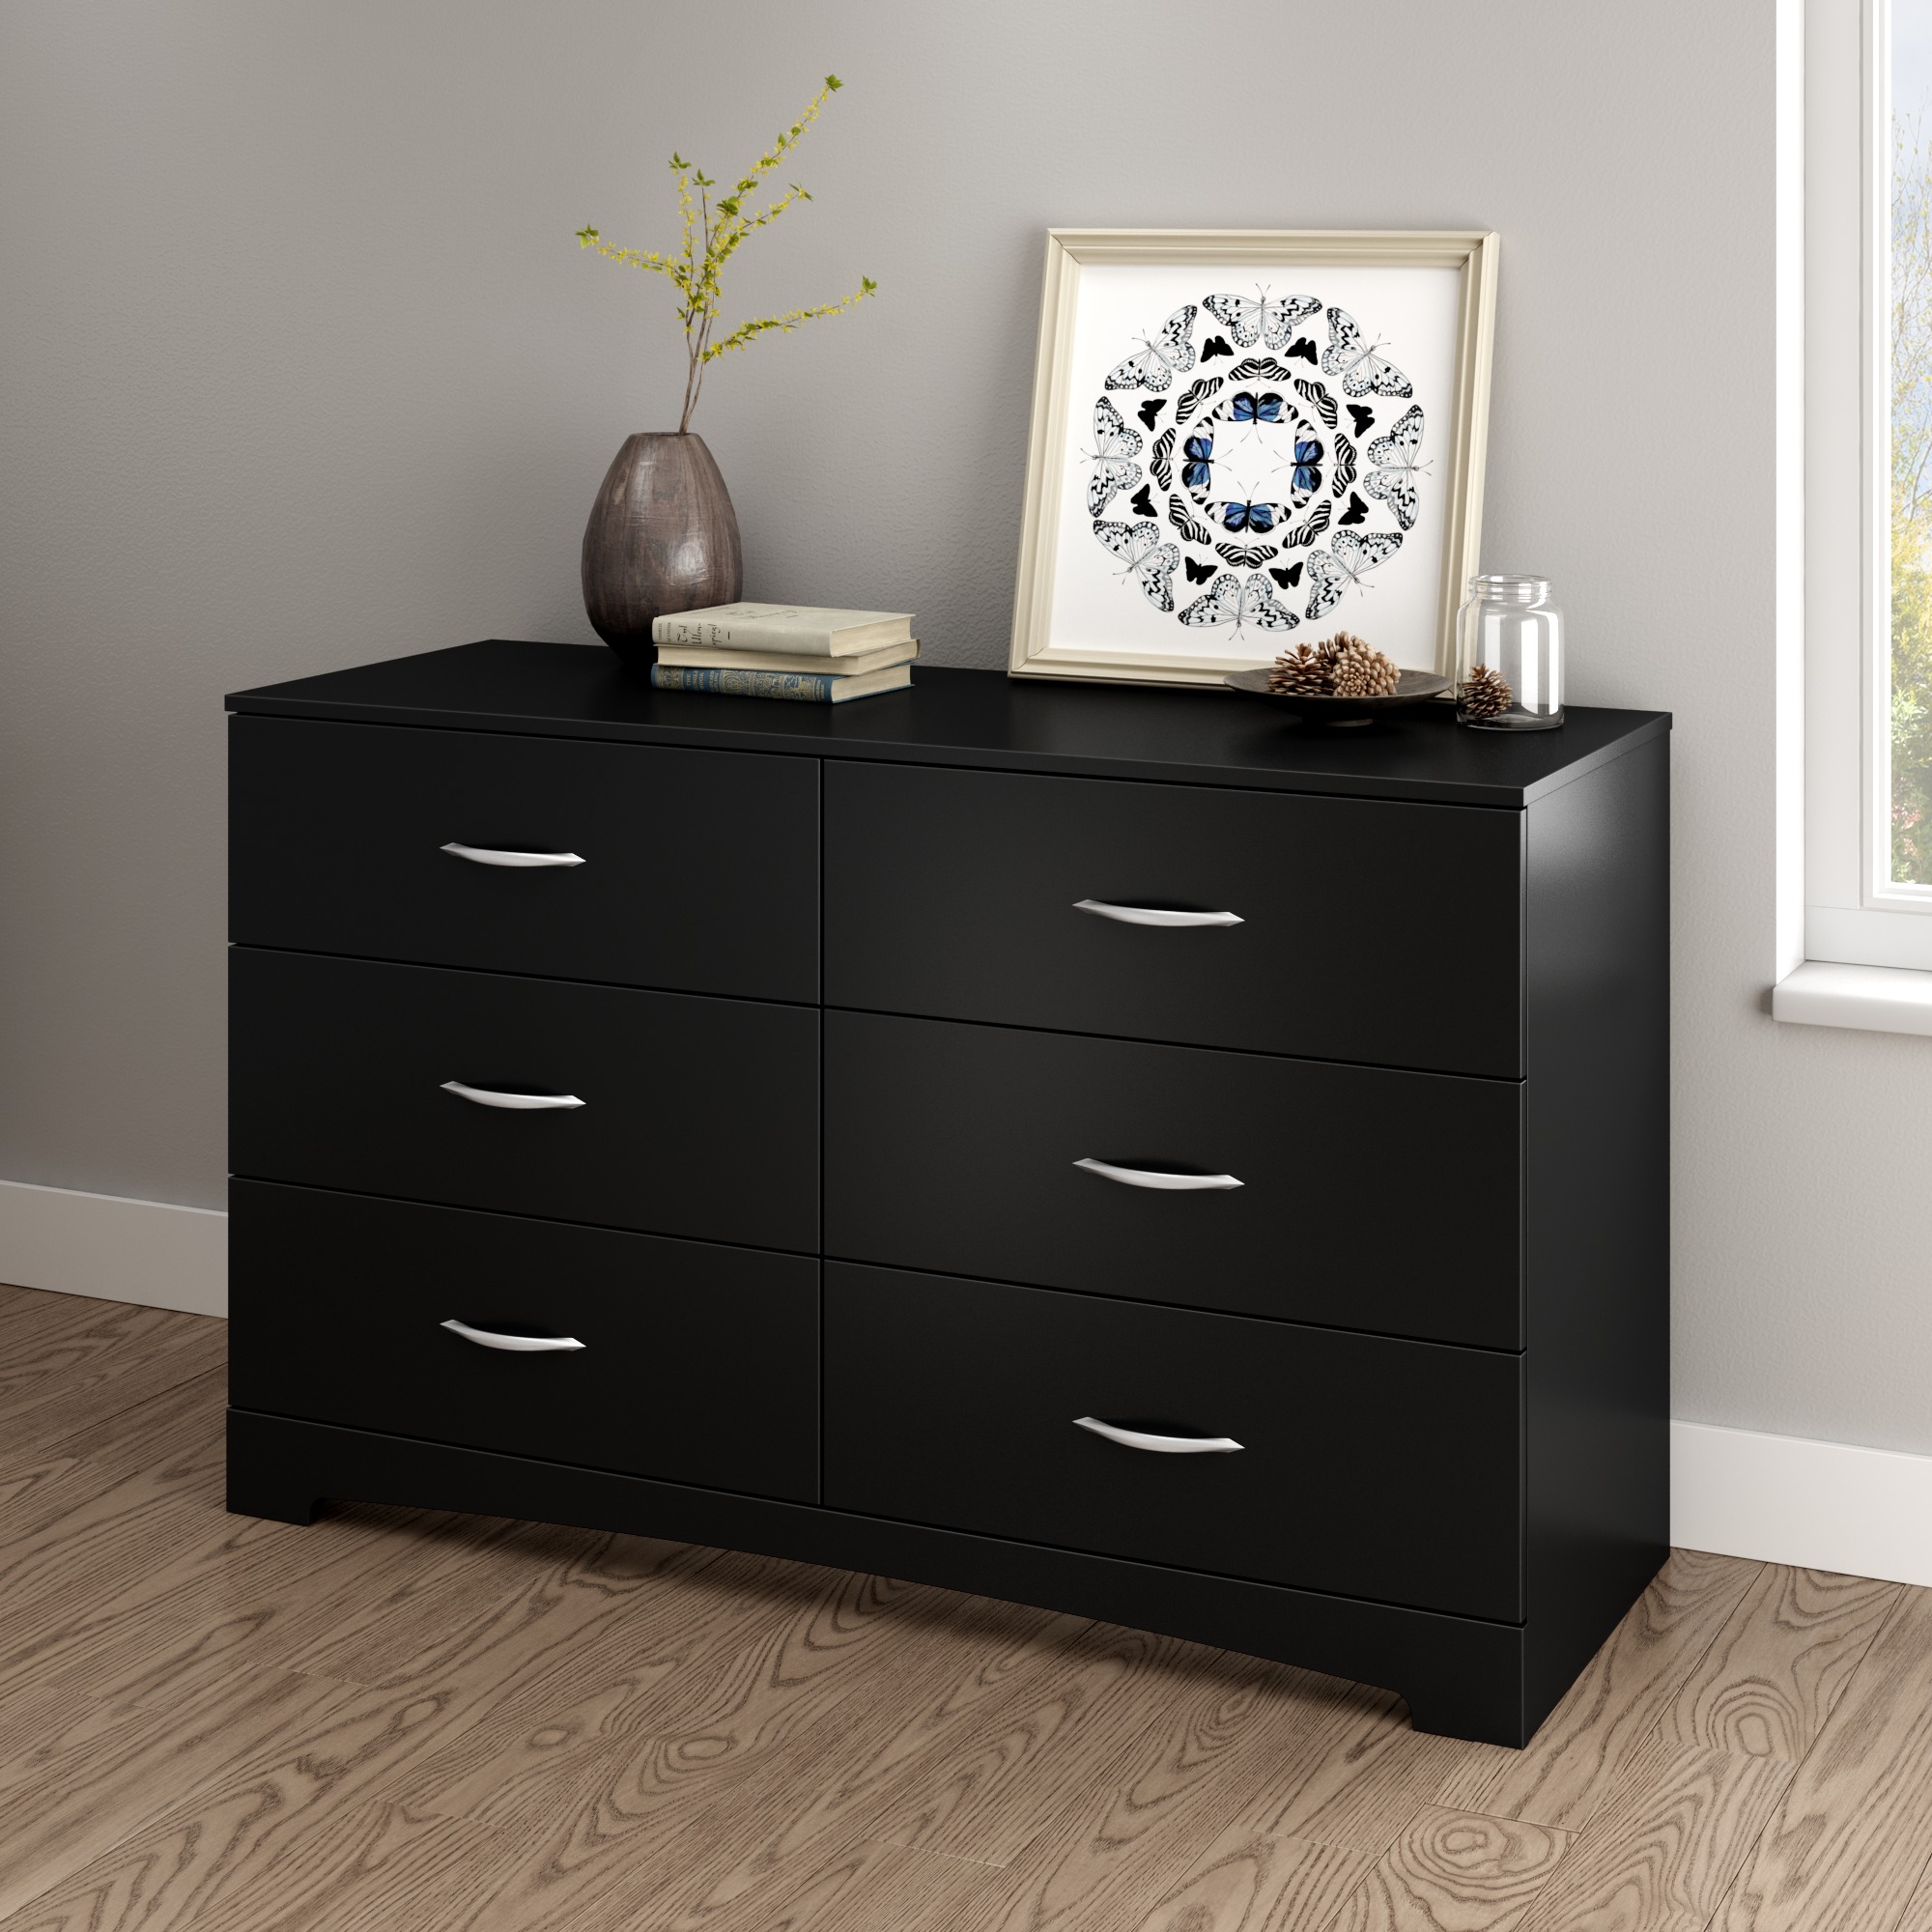 South Shore Maddox 6 Drawer Double Dresser in Pure Black - image 1 of 11